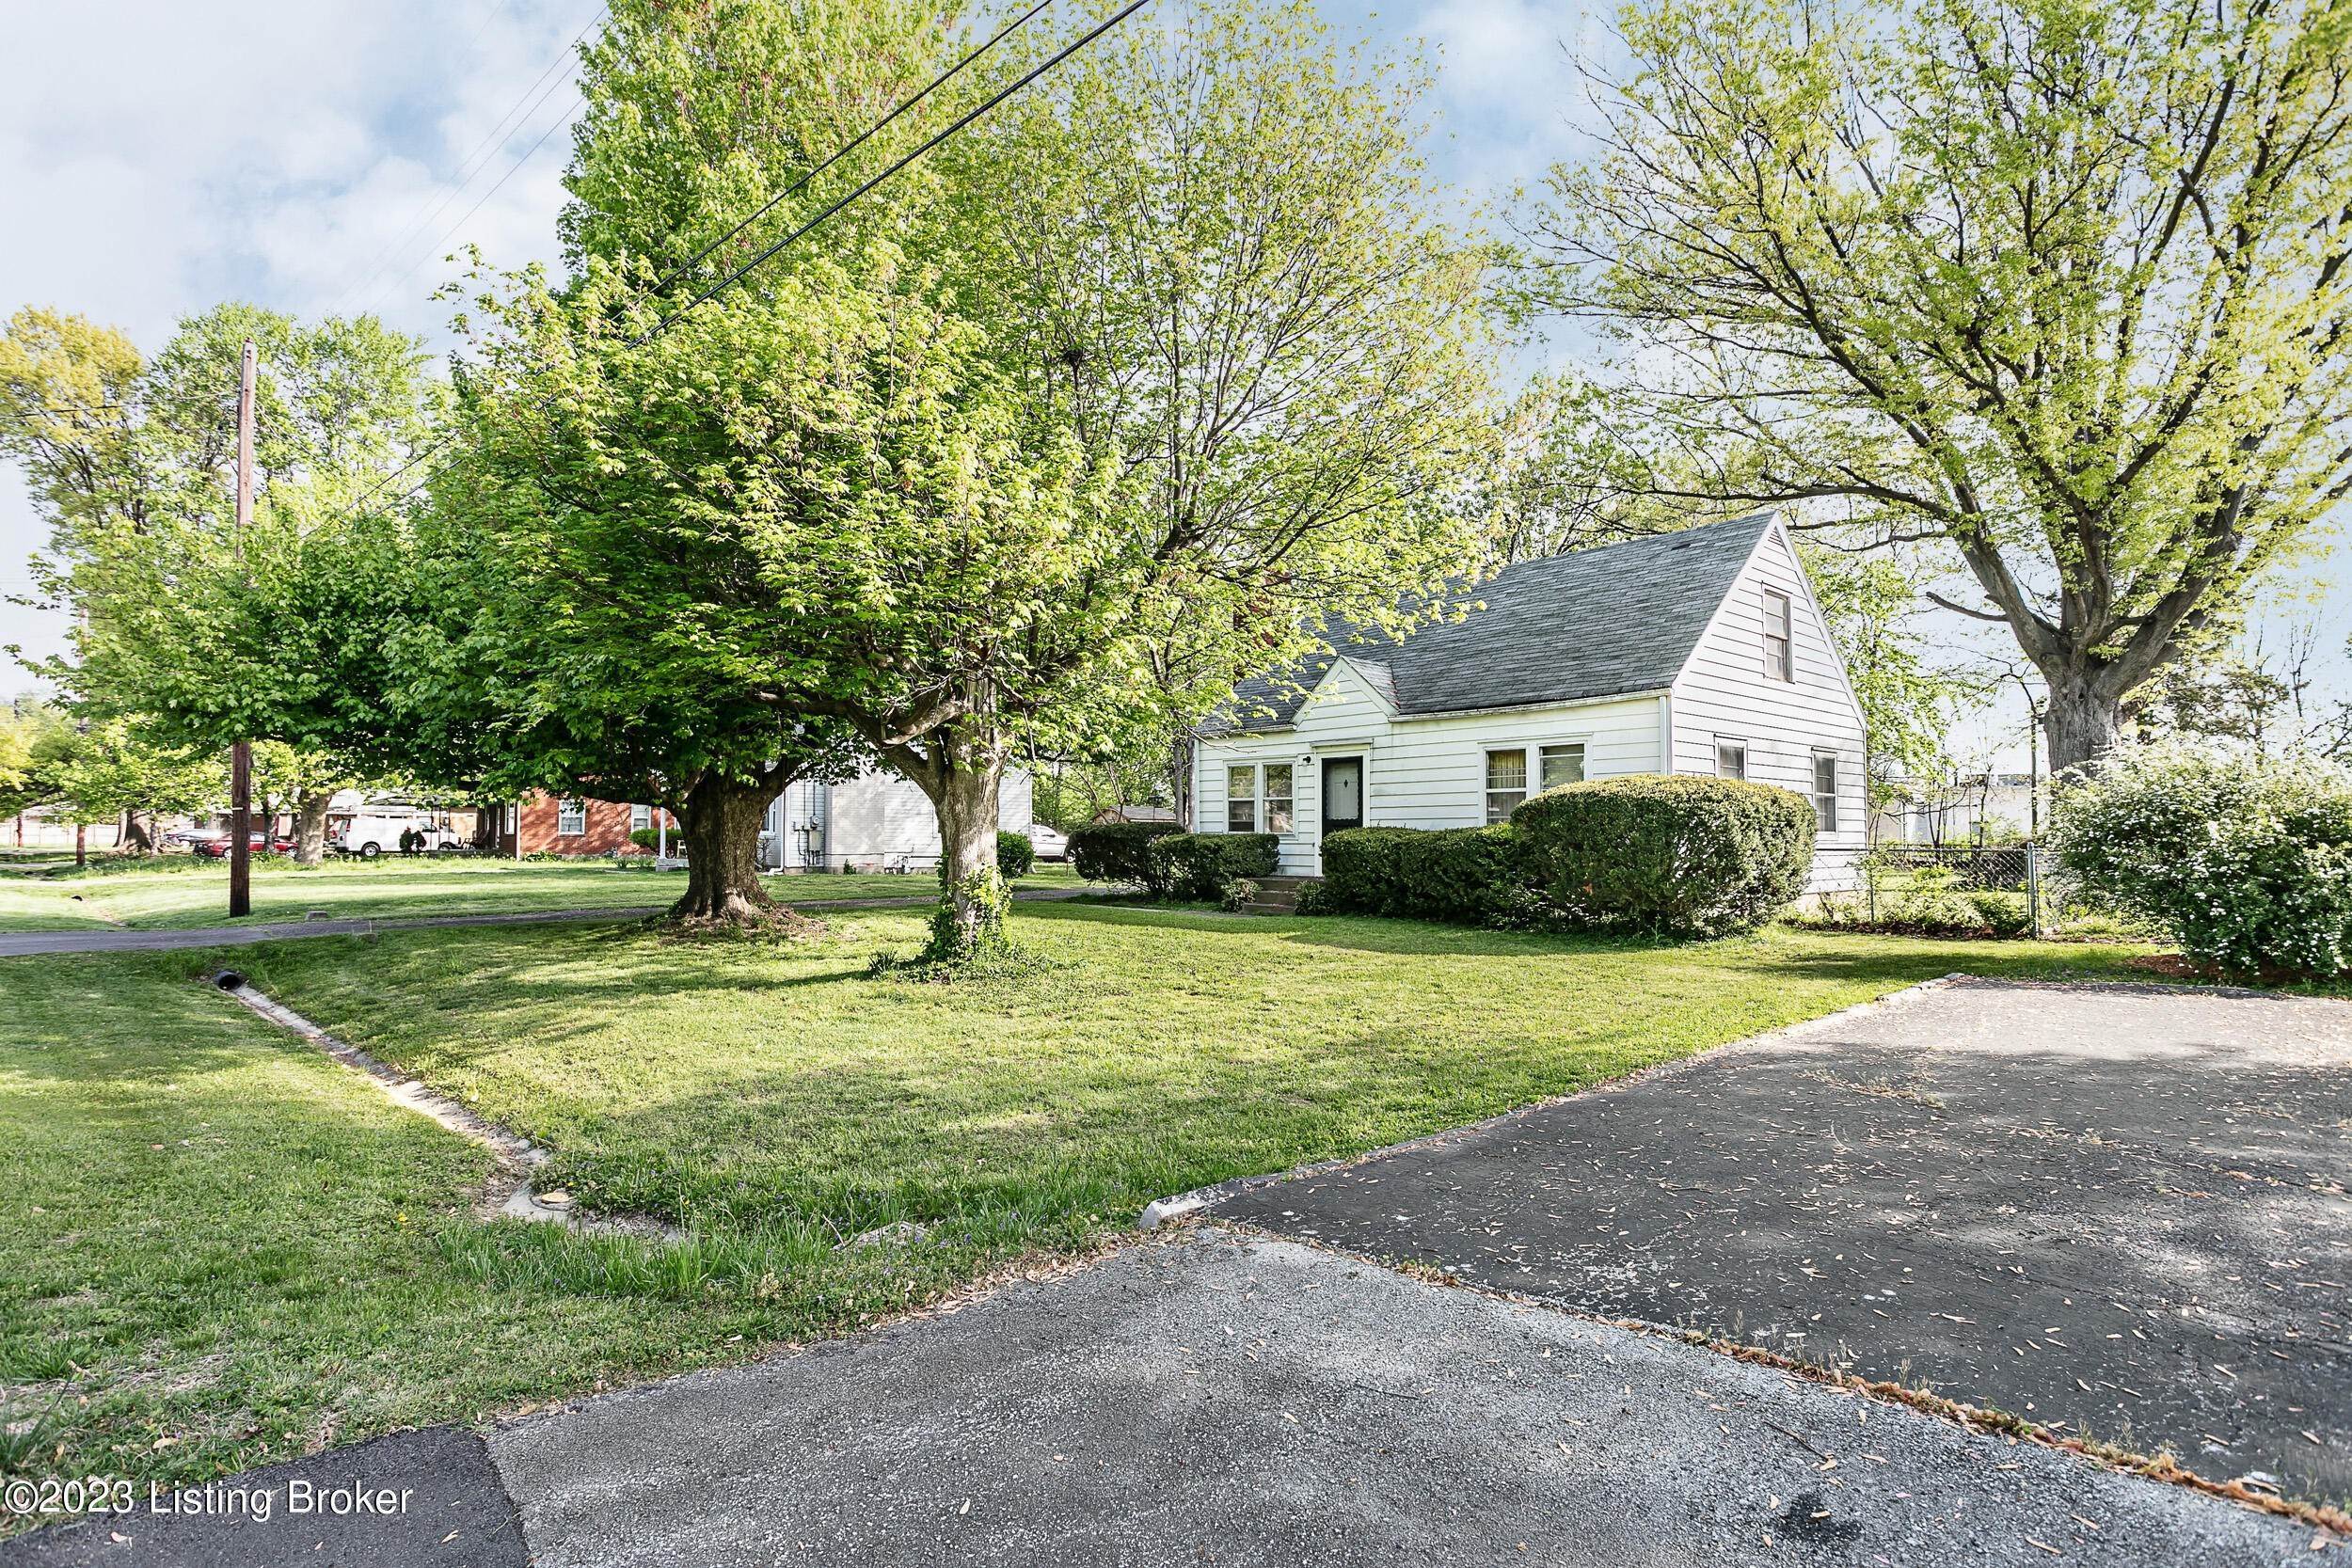 4. Single Family at Louisville, KY 40219